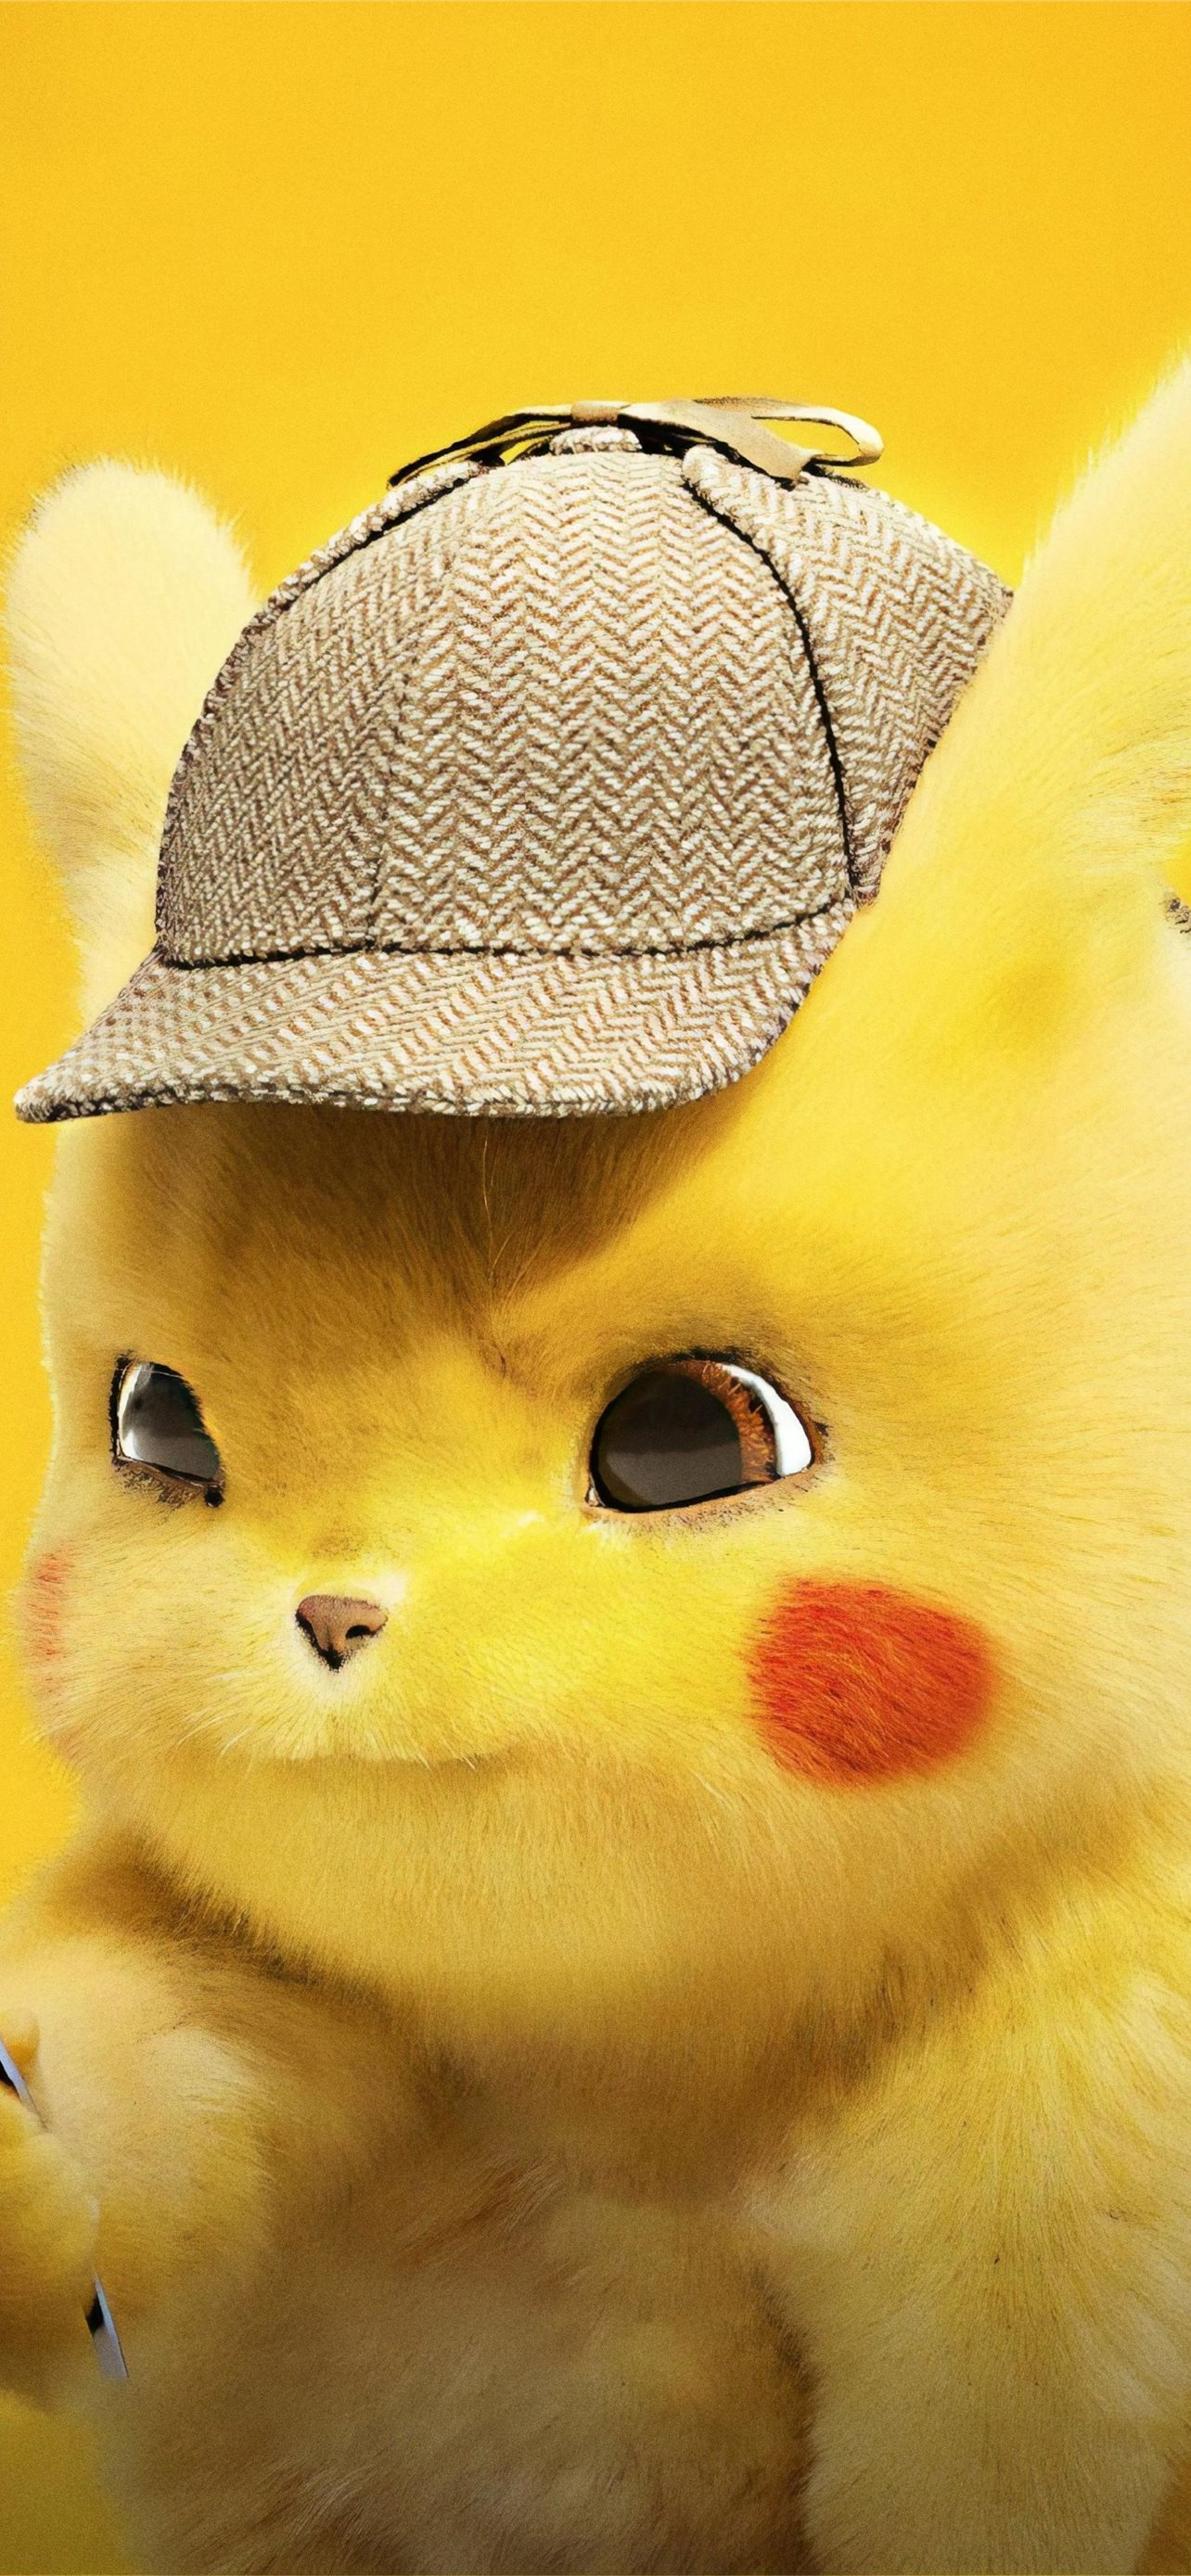 1284x2778 pikachu hd iPhone Wallpapers Free Download